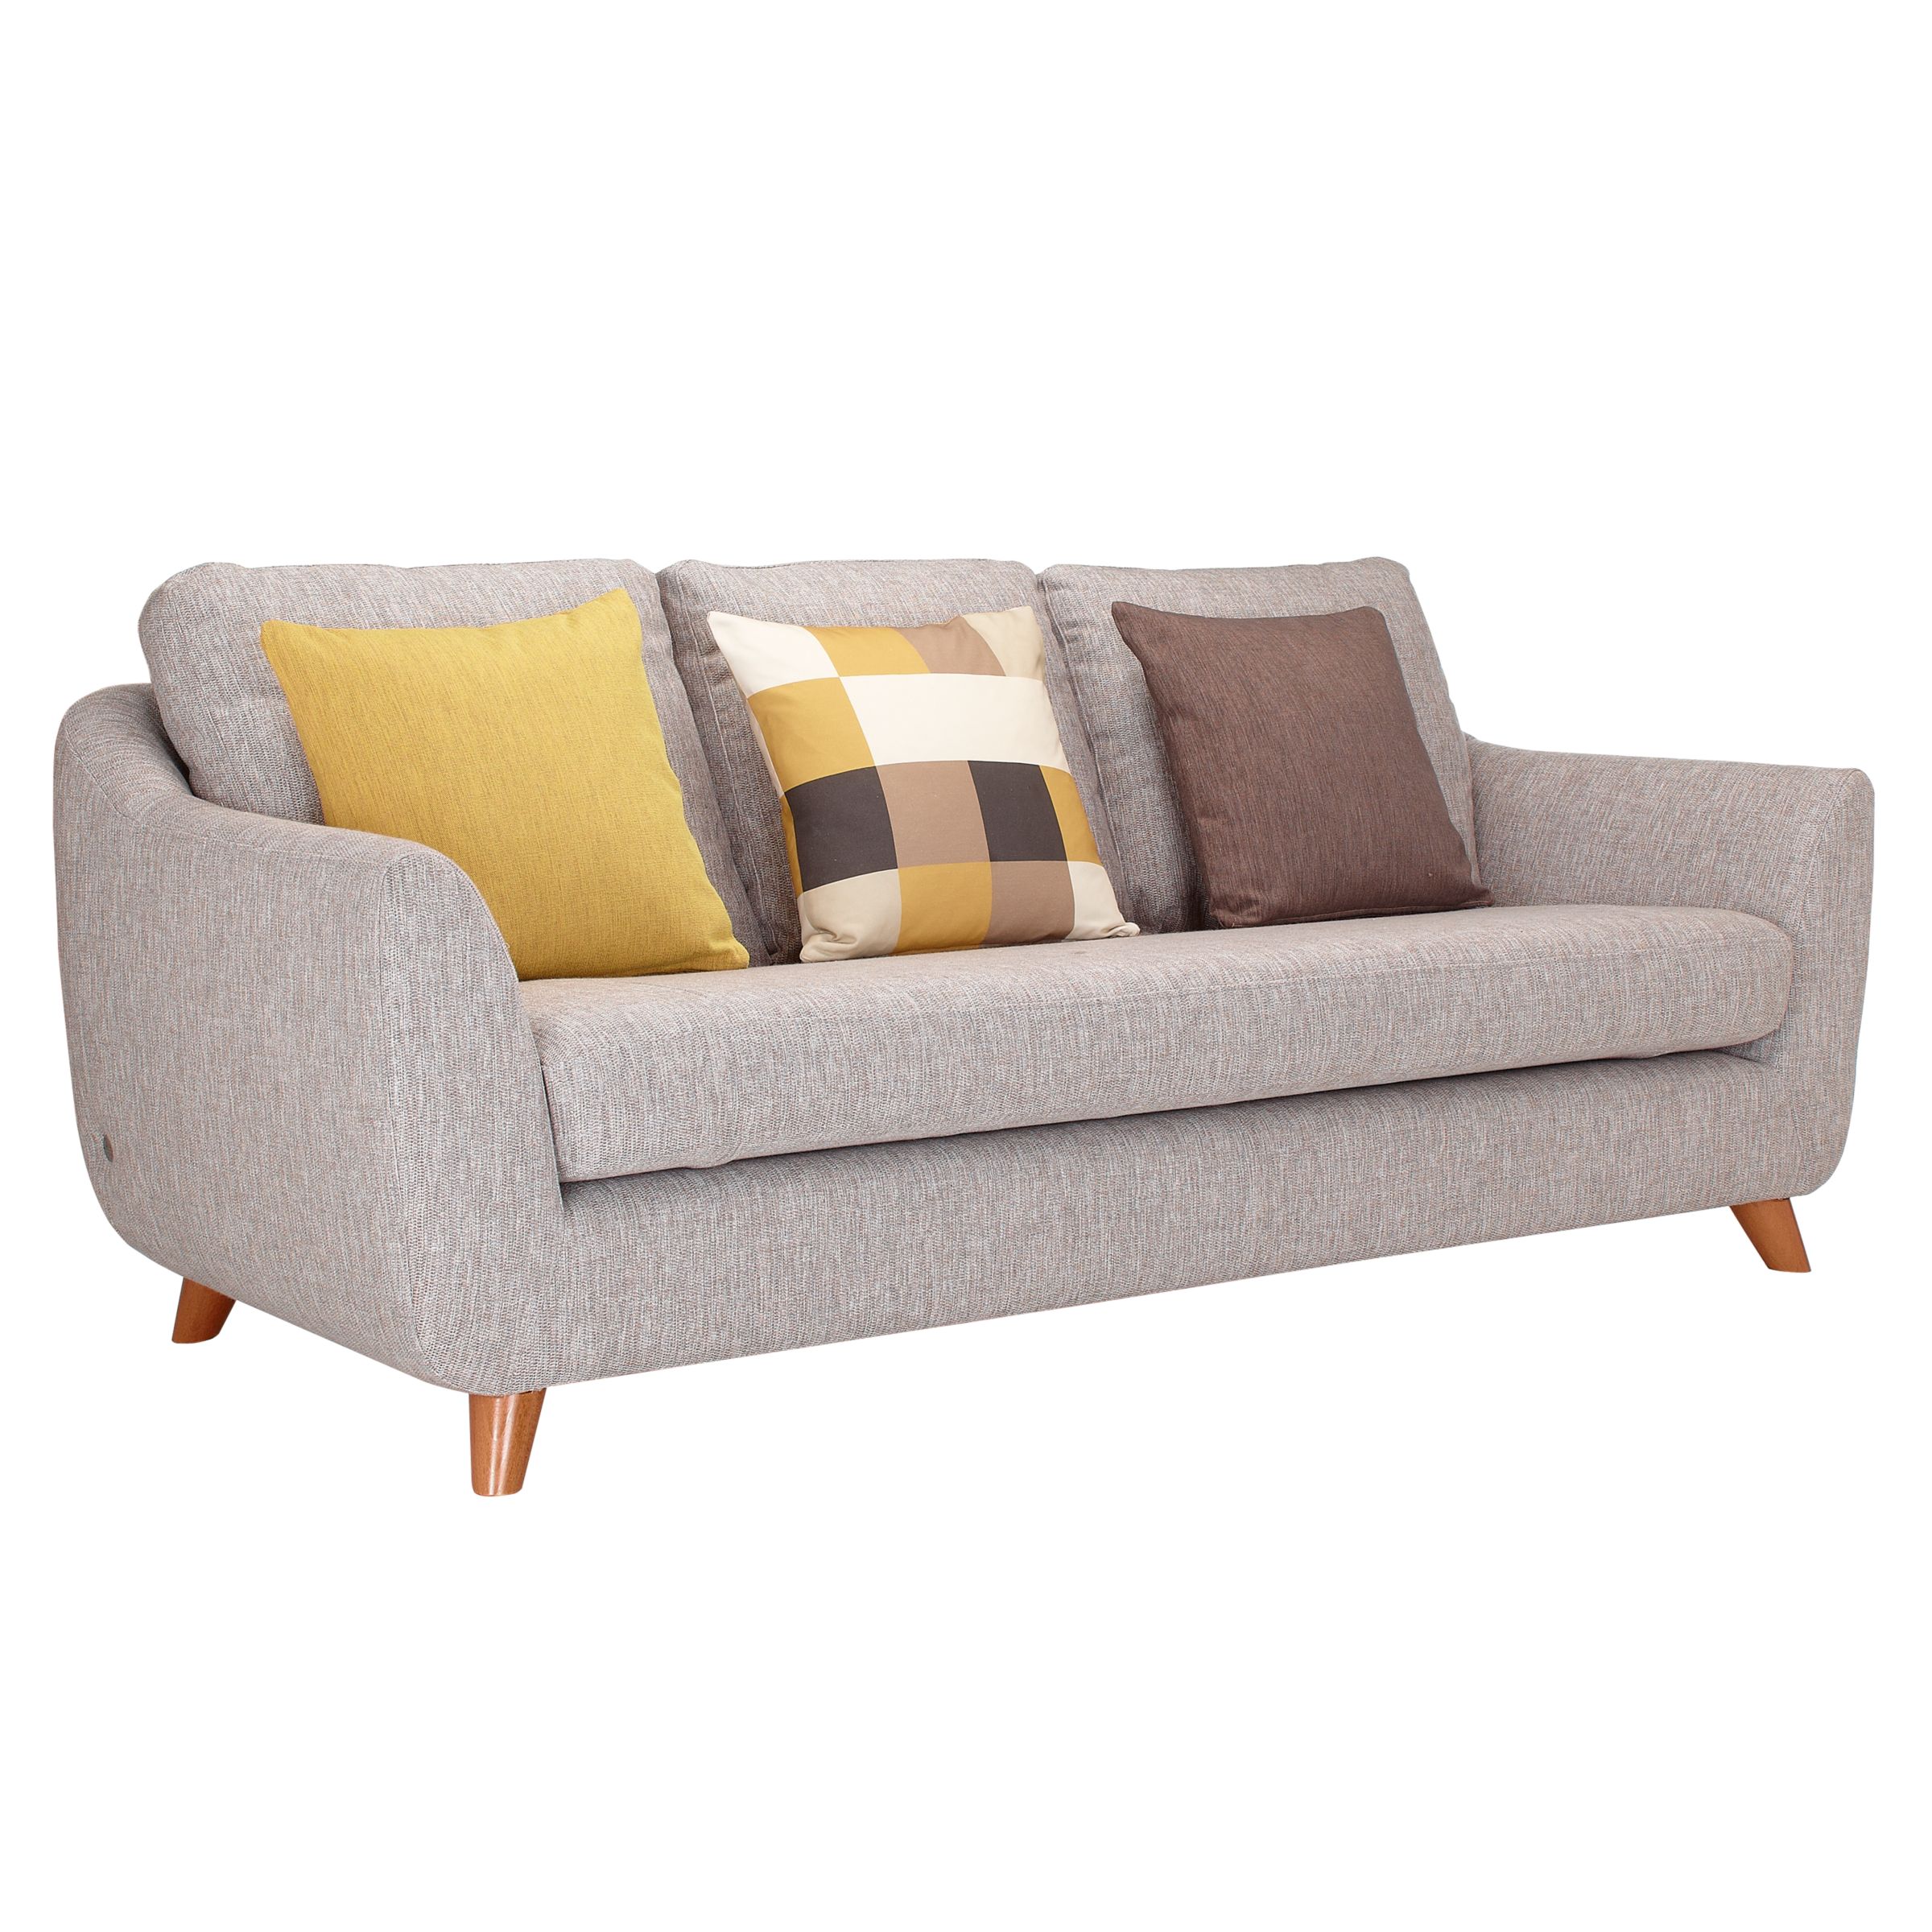 G Plan Vintage The Sixty Seven Large 3 Seater Sofa, Marl ...